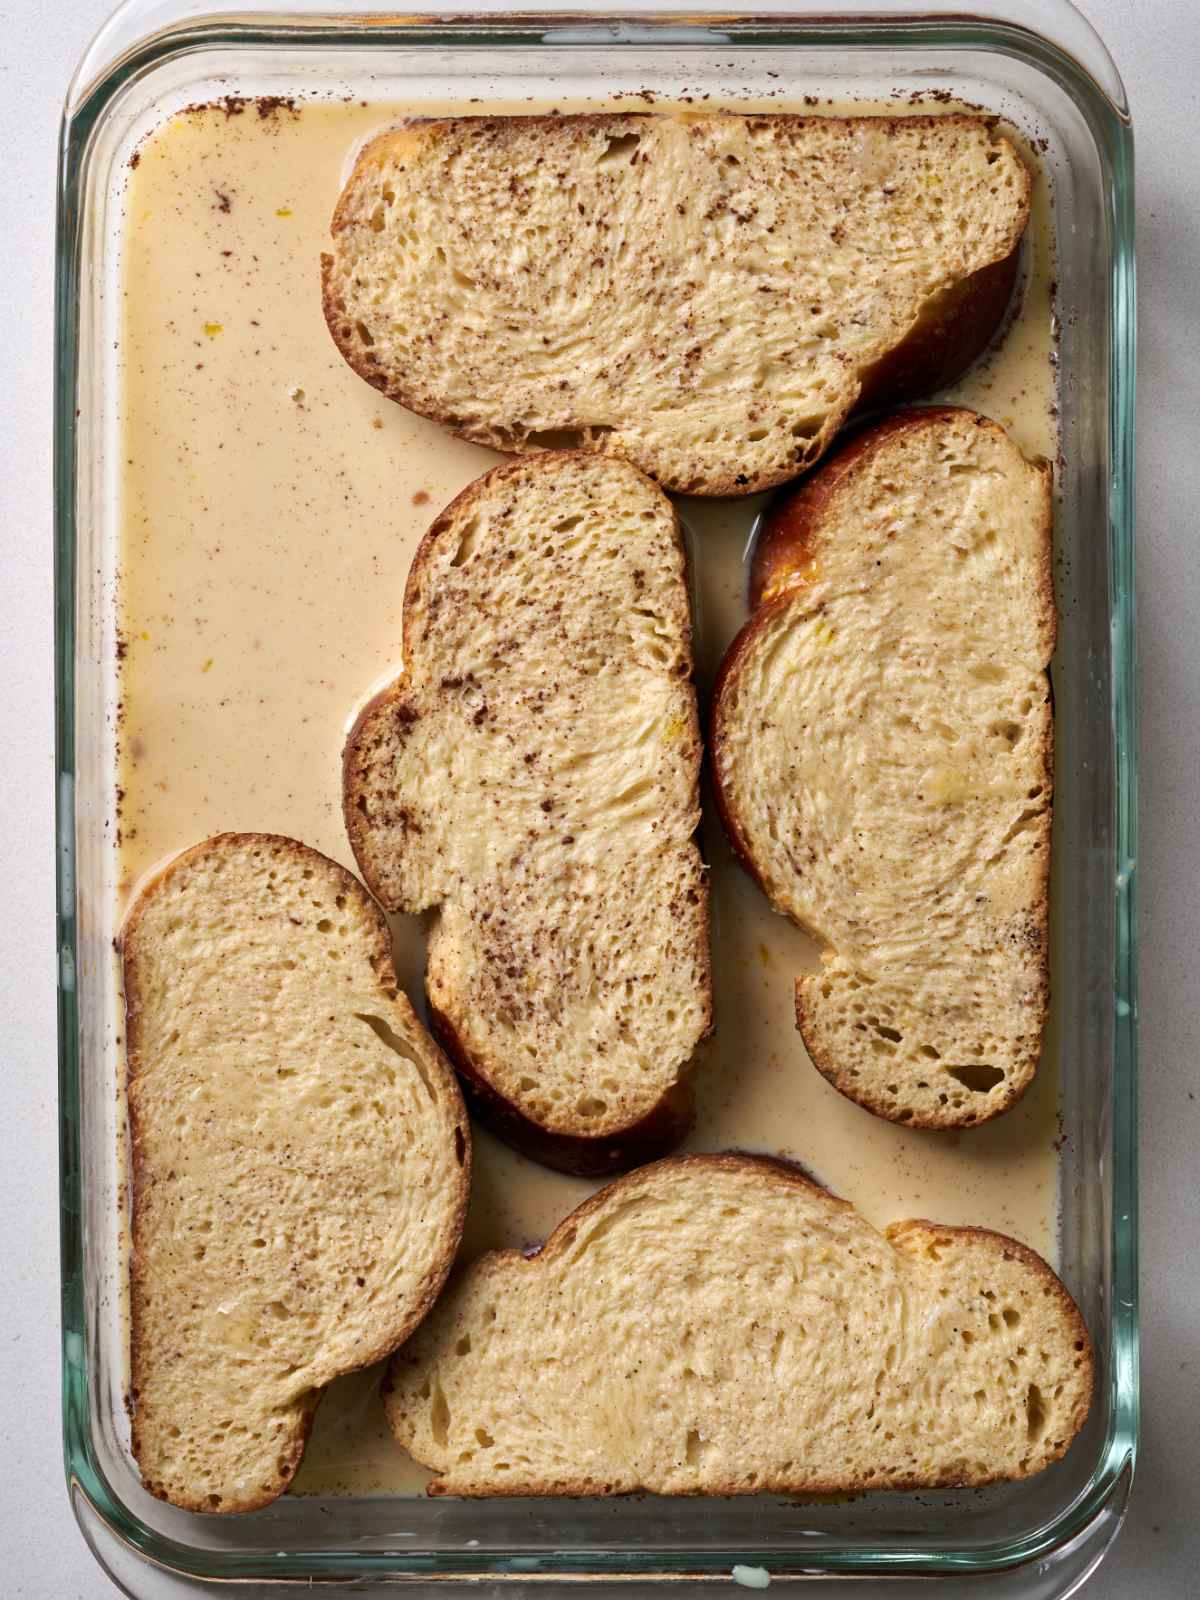 A large glass baking dish with five slices of challah bread soaking in a light brown liquid.